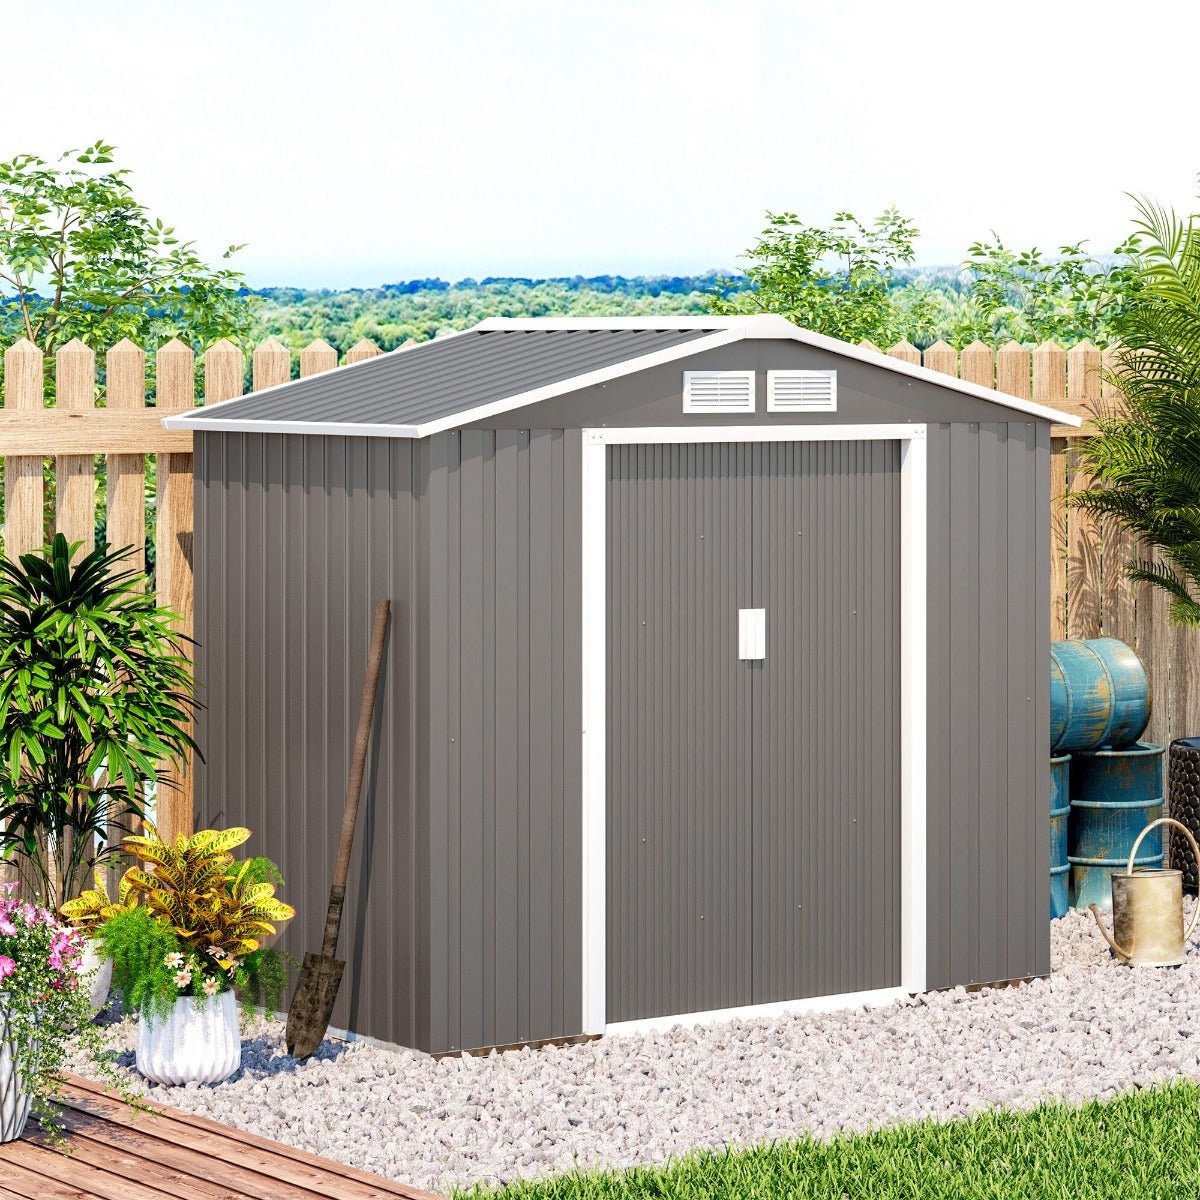 Outdoor and Garden-7' x 4' Garden Storage Shed Organizer, Metal Outdoor Backyard Garden Utility Storage Tool Shed Kit for Patio Garden Yard, Gray/White - Outdoor Style Company